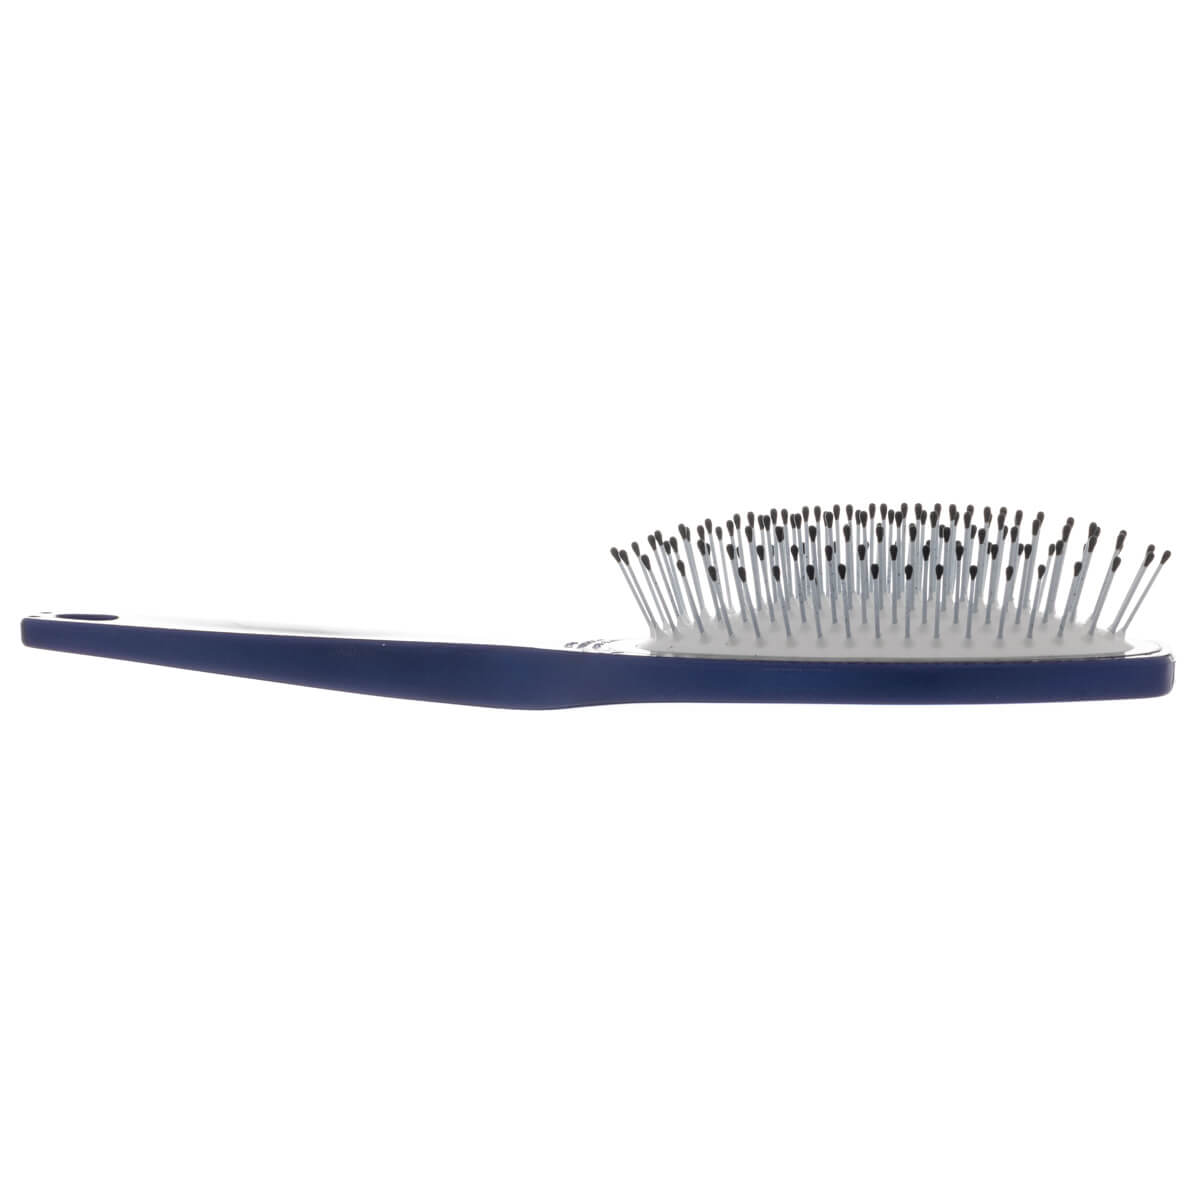 Oval steel -spike pillow brush airline (21.5cm)